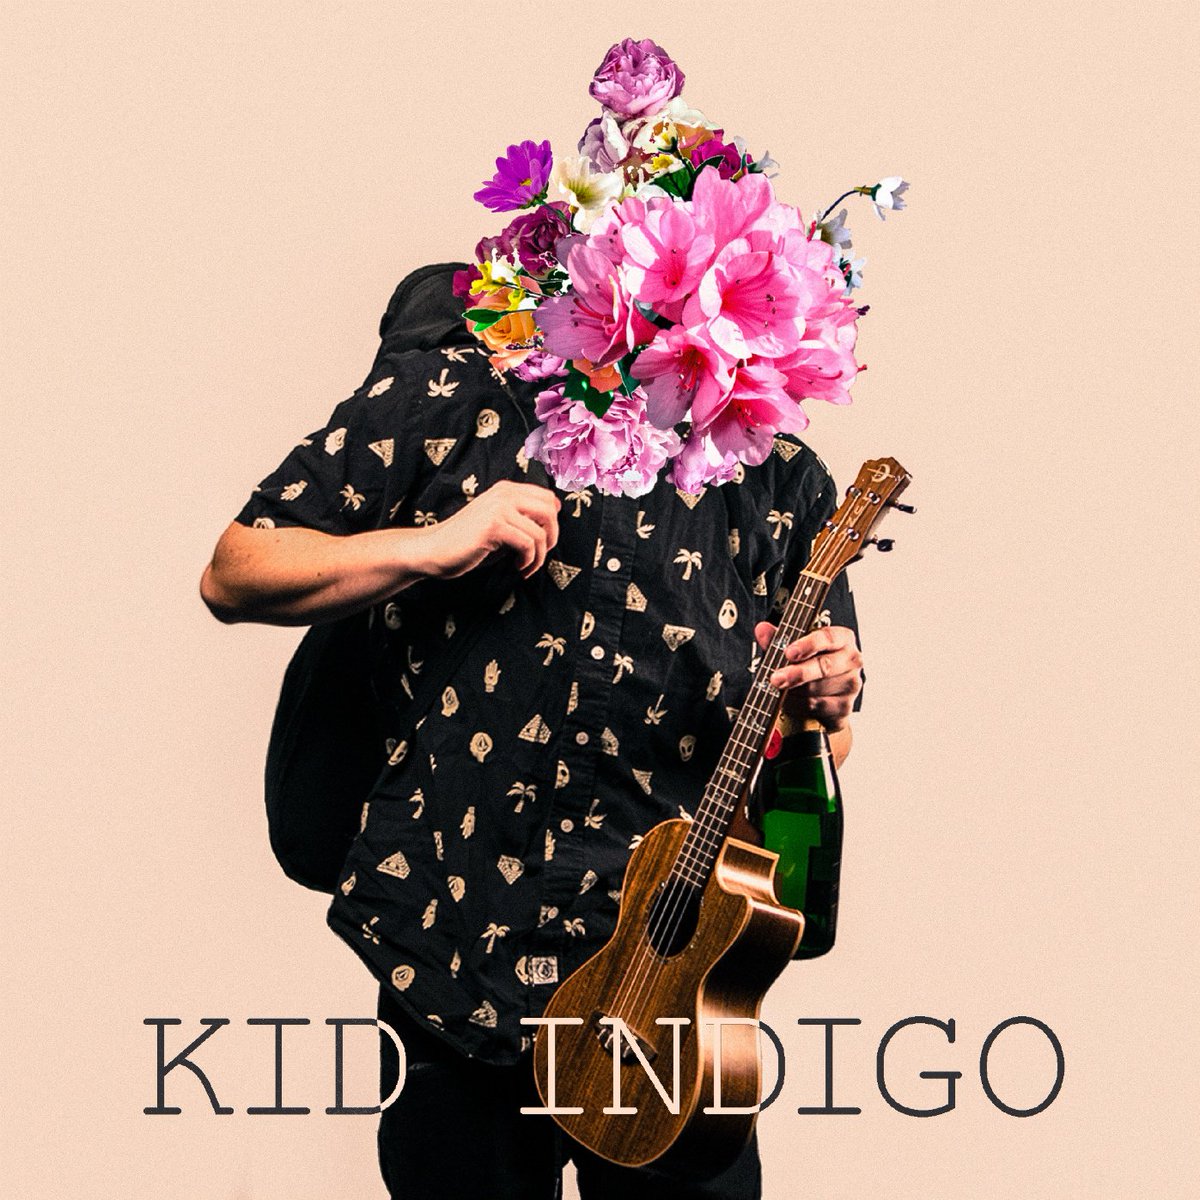 NEW @RealKidIndigo single 'Champagne' dropping June 10th on iTunes, Google Play, Amazon, 24-7, and GreatIndieMusic!